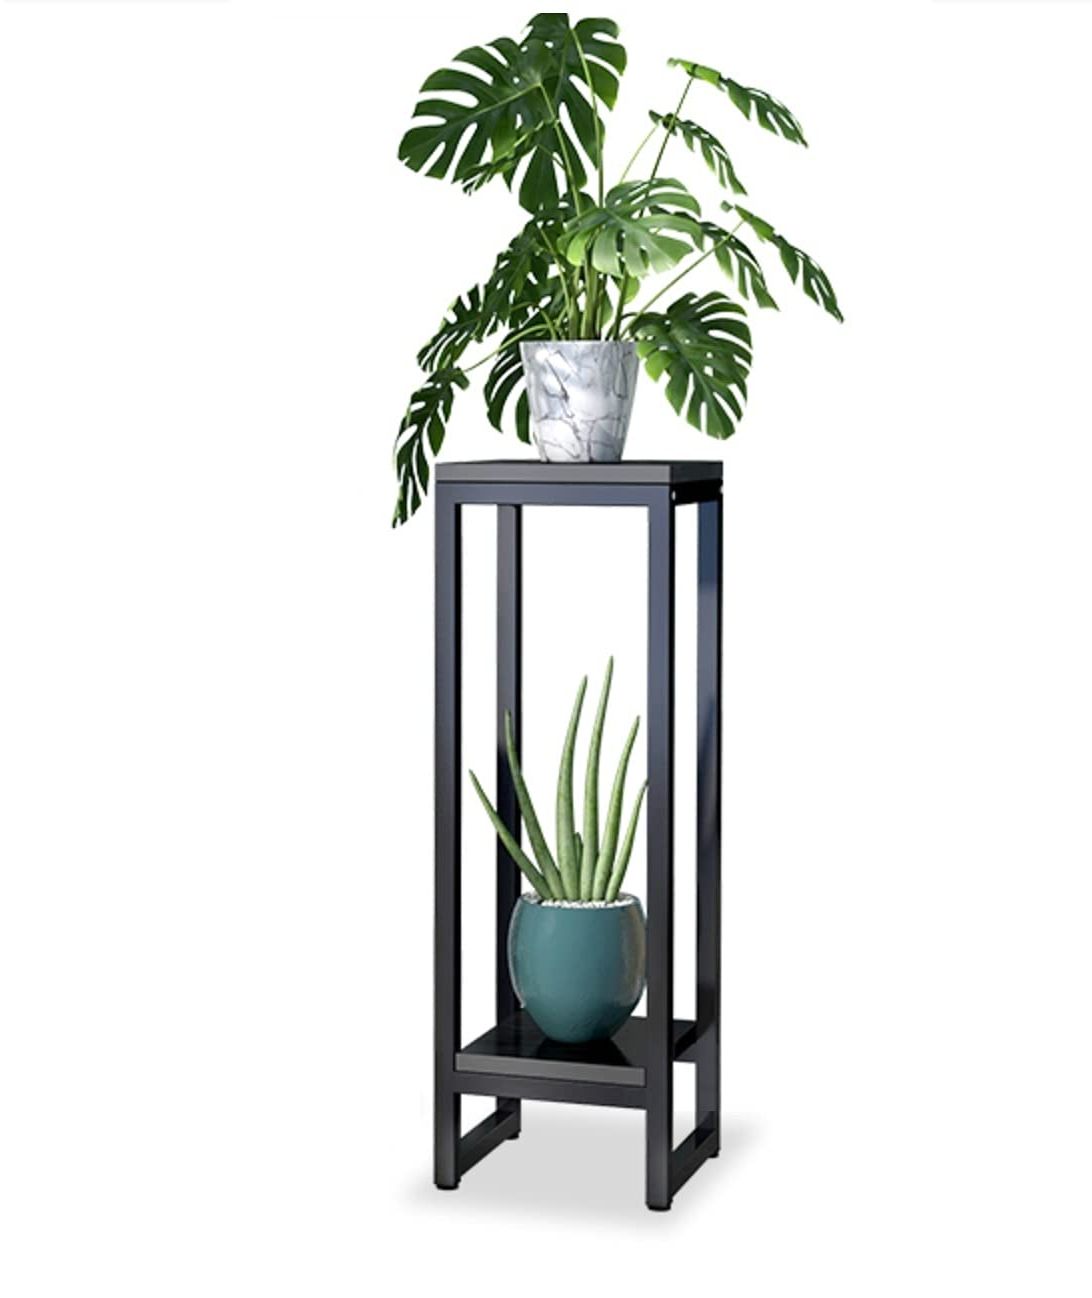 Amazon: Weenine 37 Inches Metal Tall Plant Stand Rack, 2 Tier Plant  Shelves Indoor Flower Pots Stand Holder Planter Display For Living Room  Balcony Garden (style B2 ) : Patio, Lawn & Garden Within Widely Used Two Tier Plant Stands (View 2 of 10)